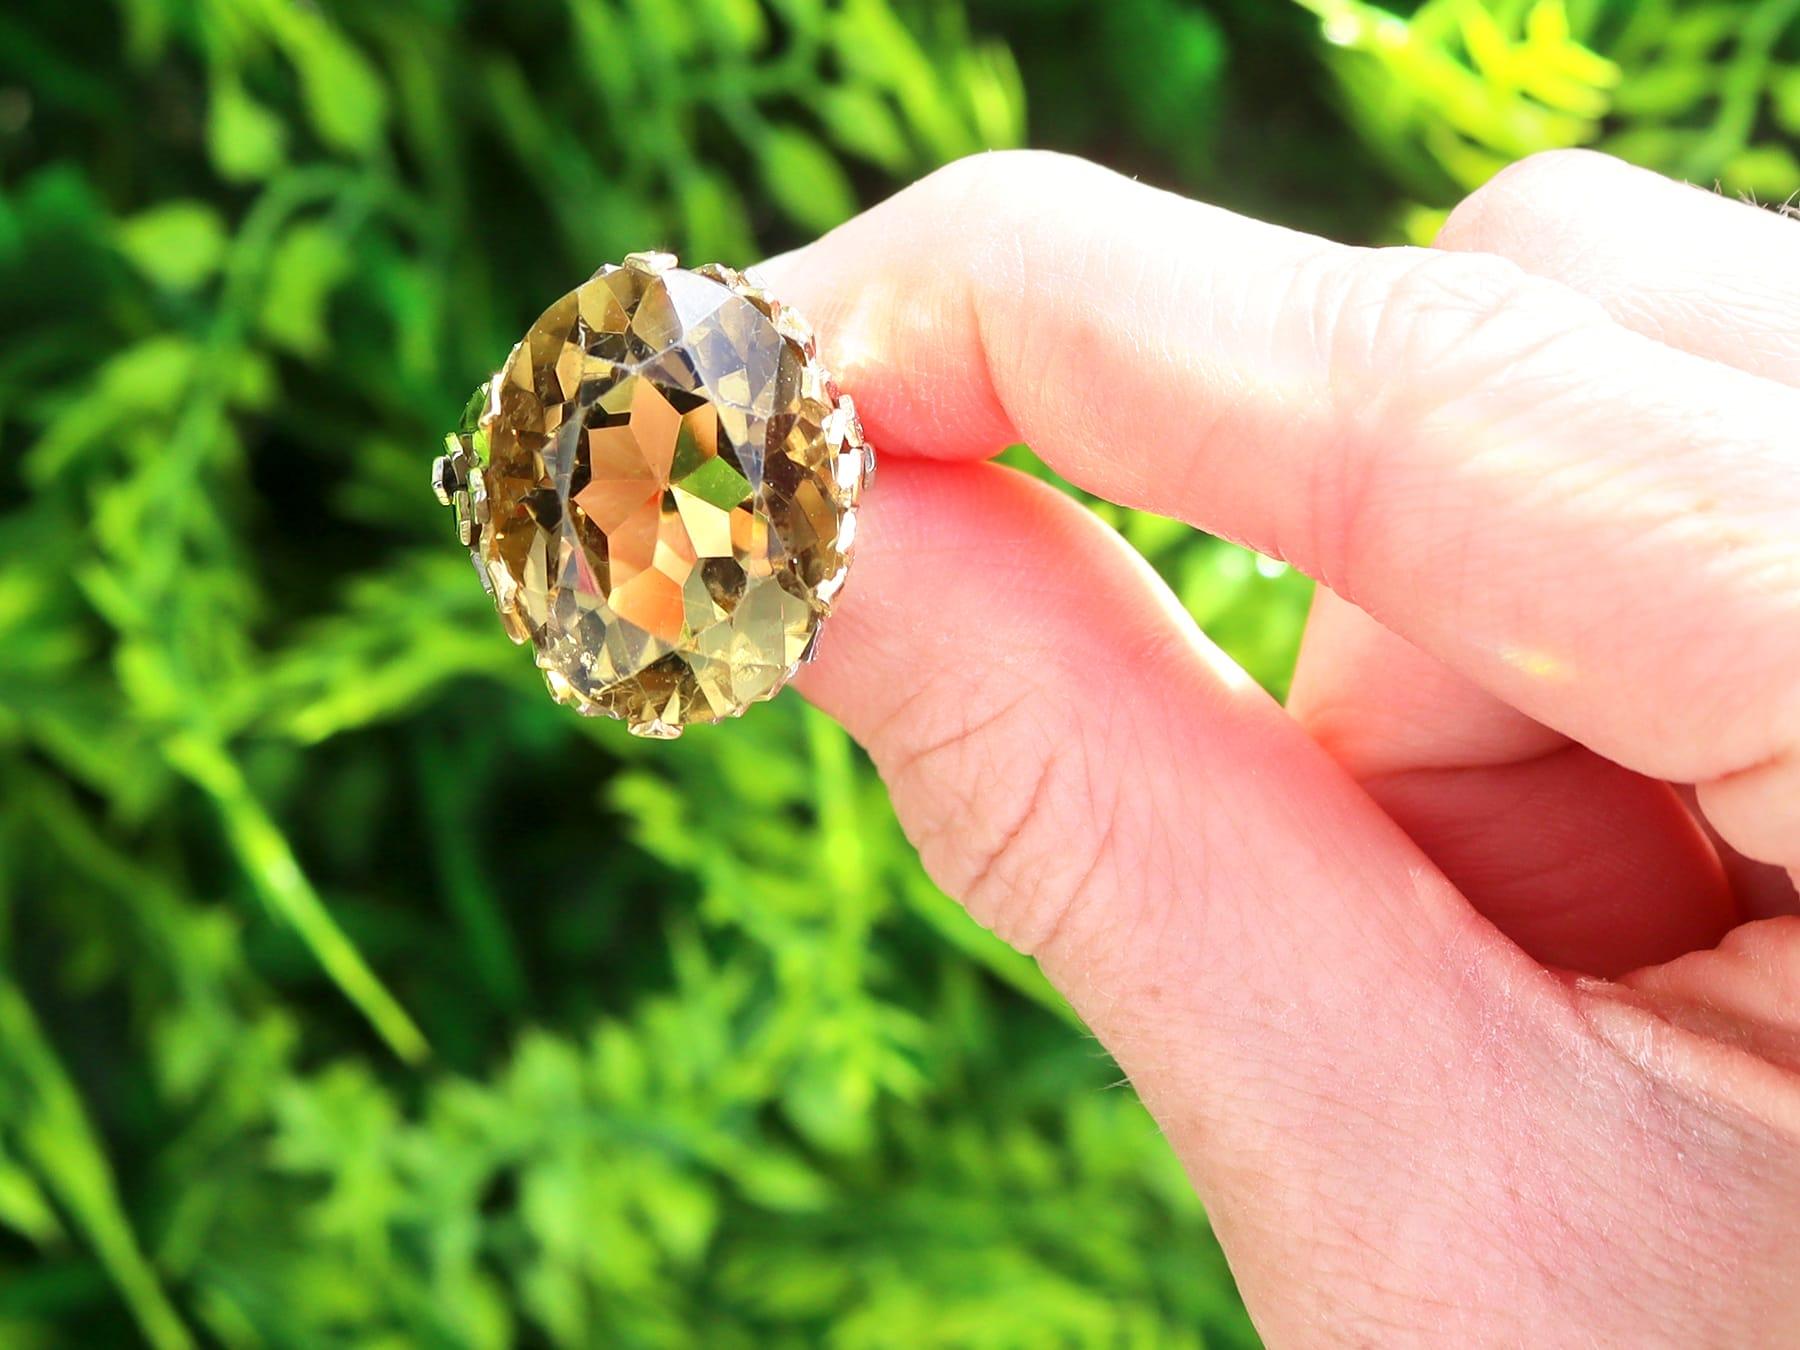 A stunning, fine and impressive vintage 19.05 carat smoky quartz and 18 karat yellow gold cocktail ring; part of our diverse vintage jewelry and estate jewelry collections.

This stunning, fine and impressive vintage quartz ring has been crafted in